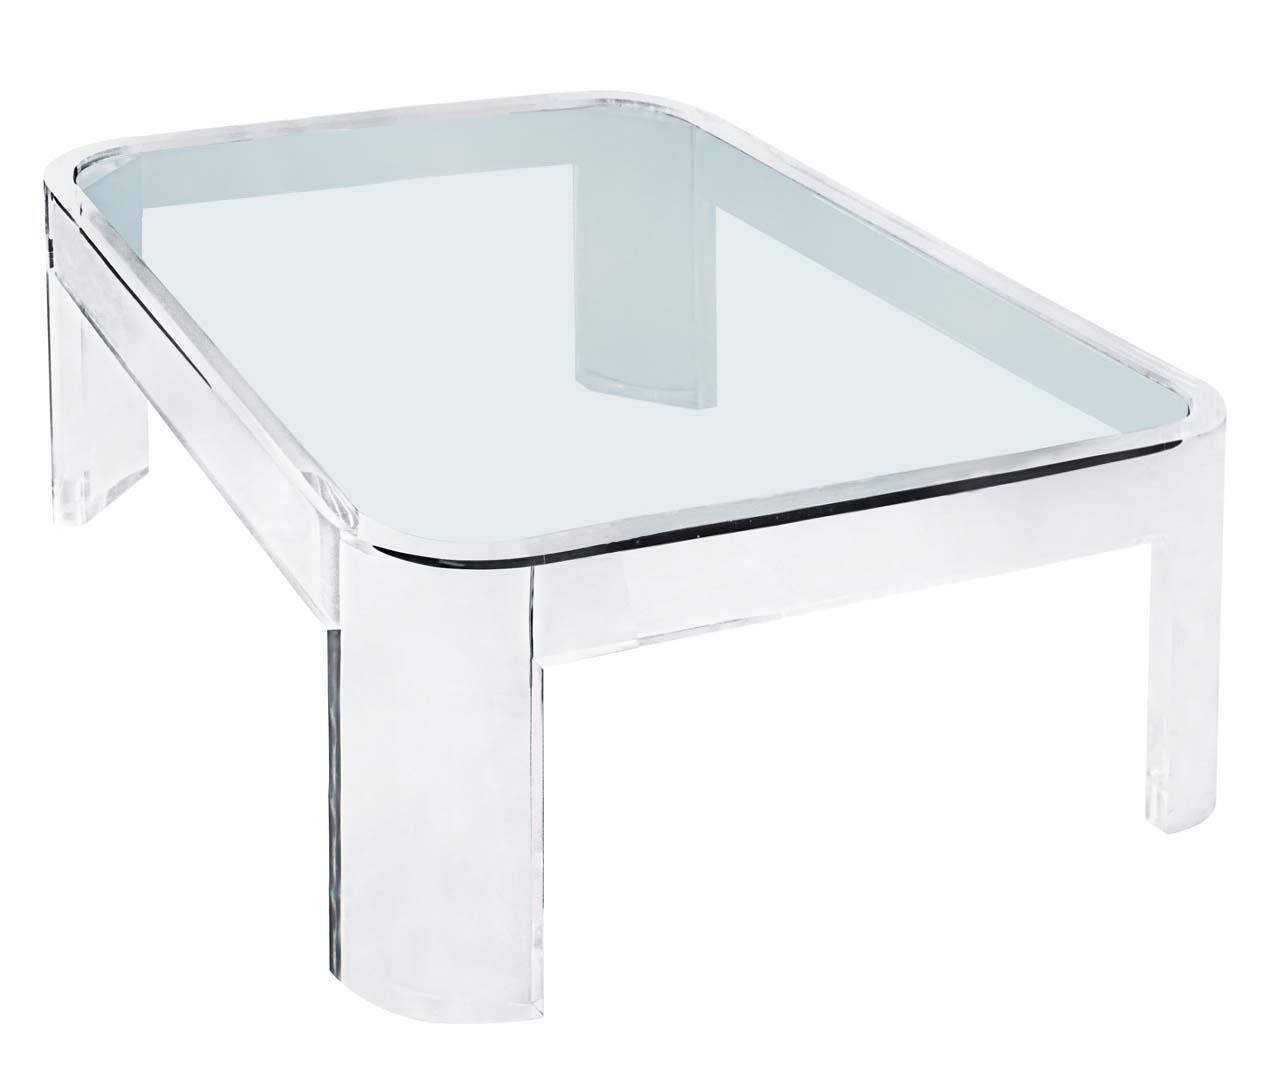 Made in the 1970s, this coffee table was produced by Les Prismatiques, who focused primarily on lucite and glass in their products. Made of thick sheets of clear lucite and glass, this coffee table is very stable and sturdy, and for its age, it has